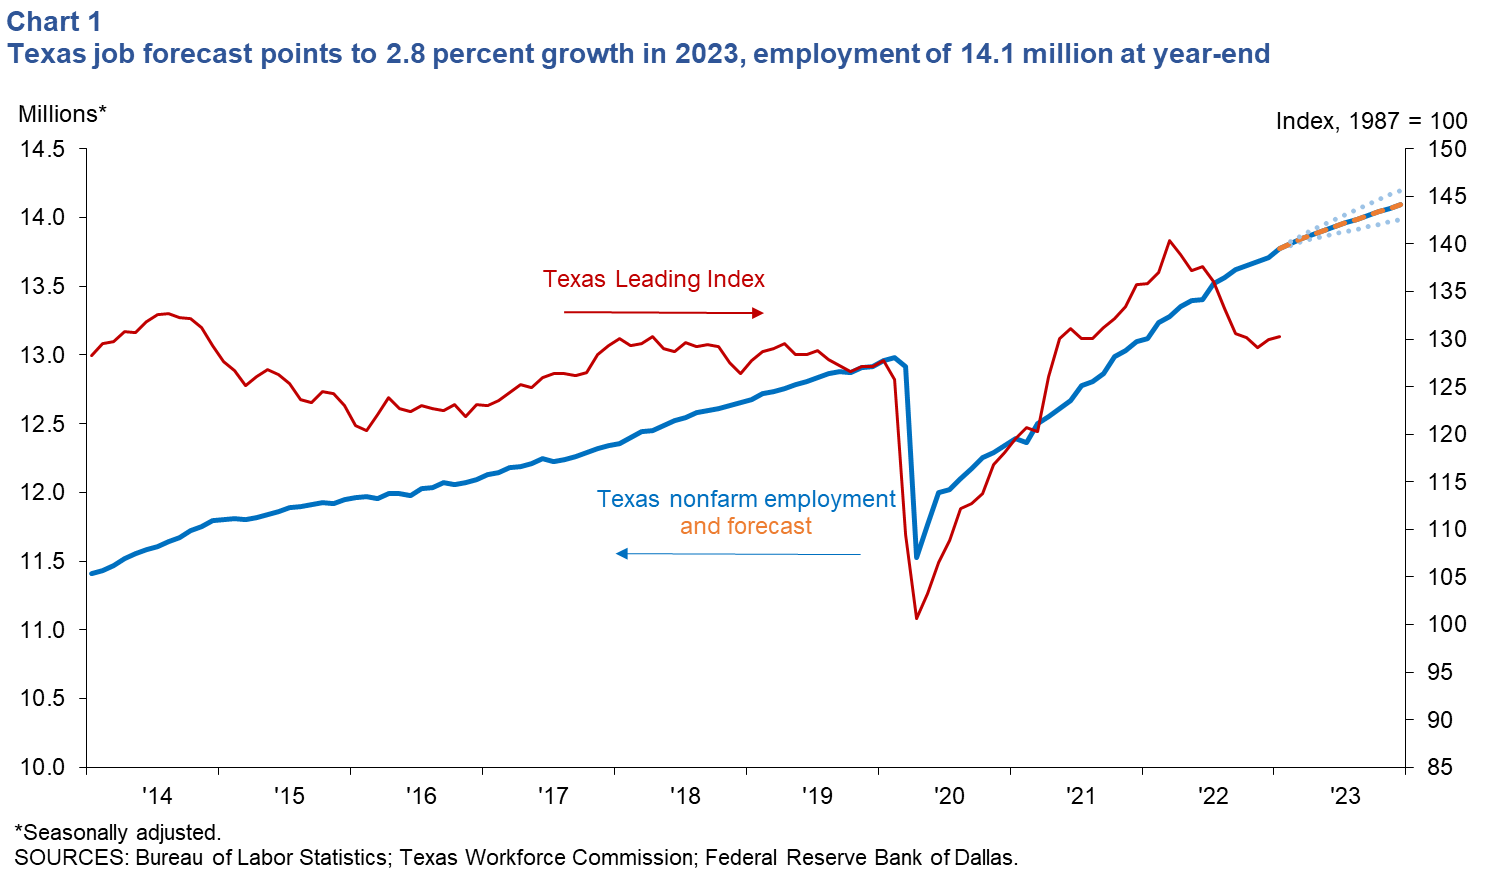 Texas job forecast points to 2.8 percent growth in 2022, employment of 14.1 million at year-end